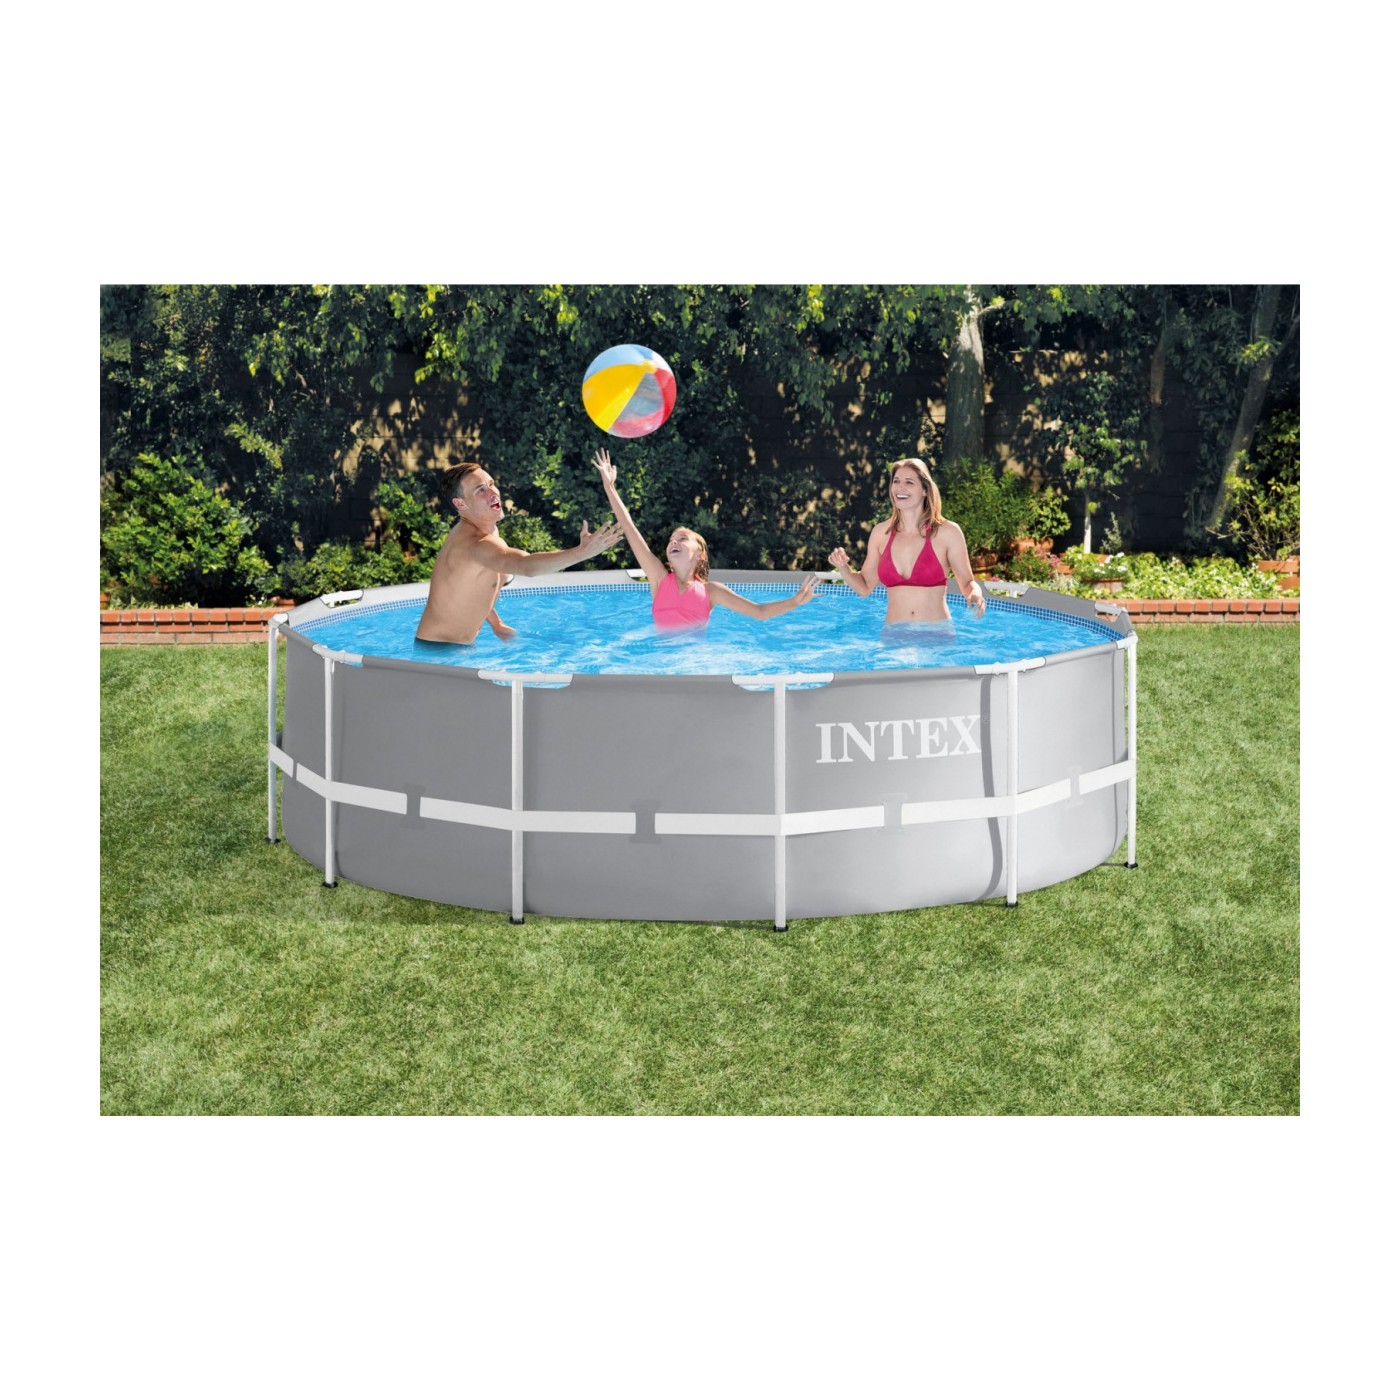 Round frame pool - 12Ft x 39 366 x 99 cm with pump